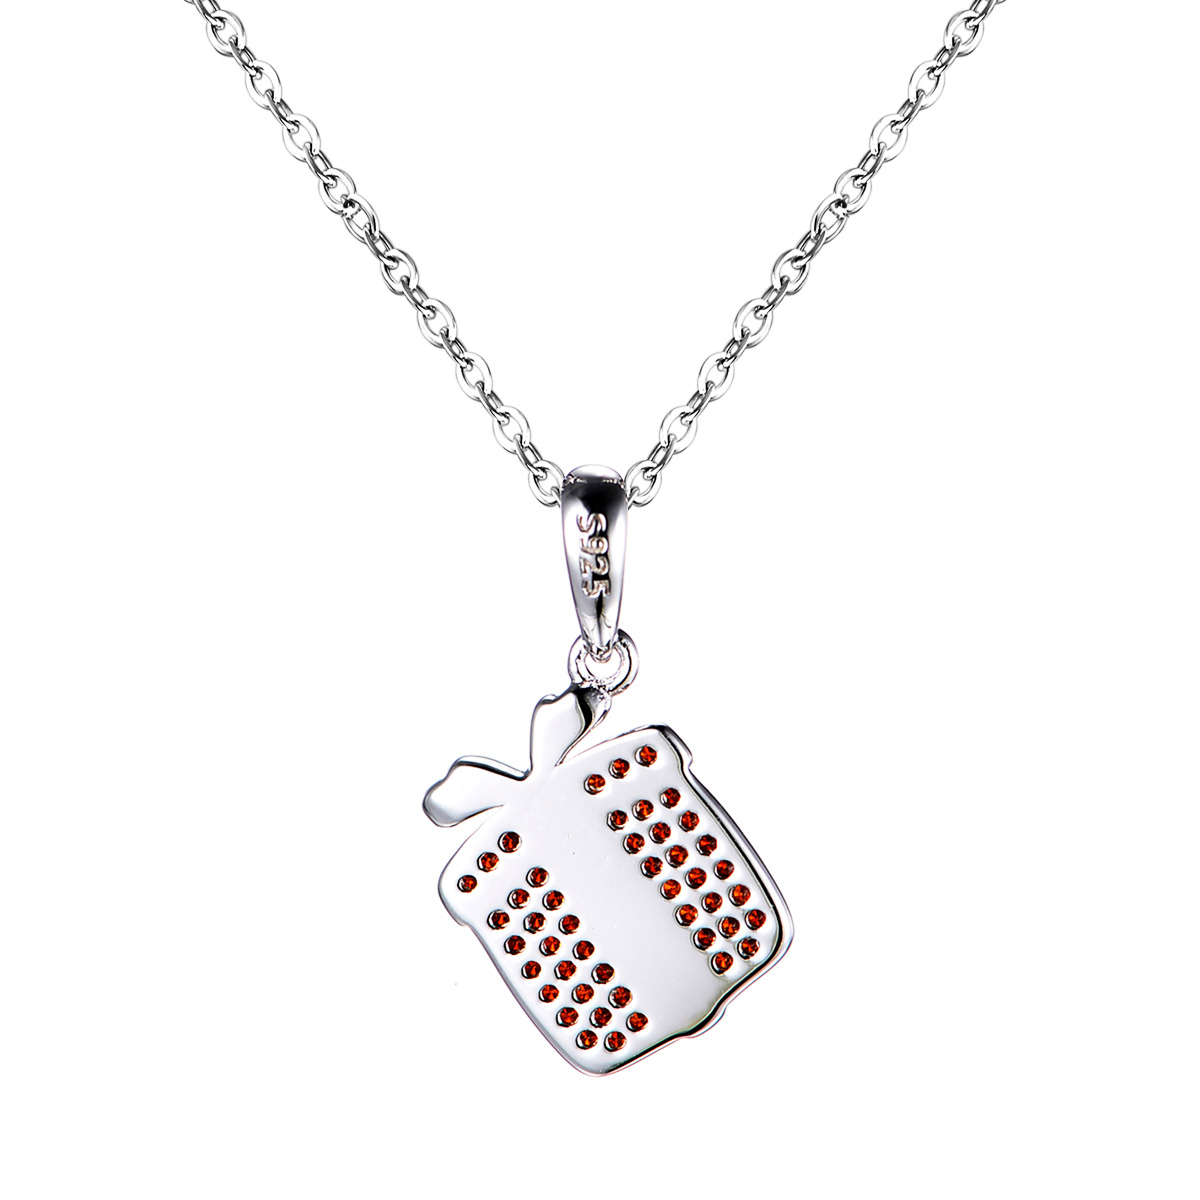 Christmas gift package silver pendant necklace